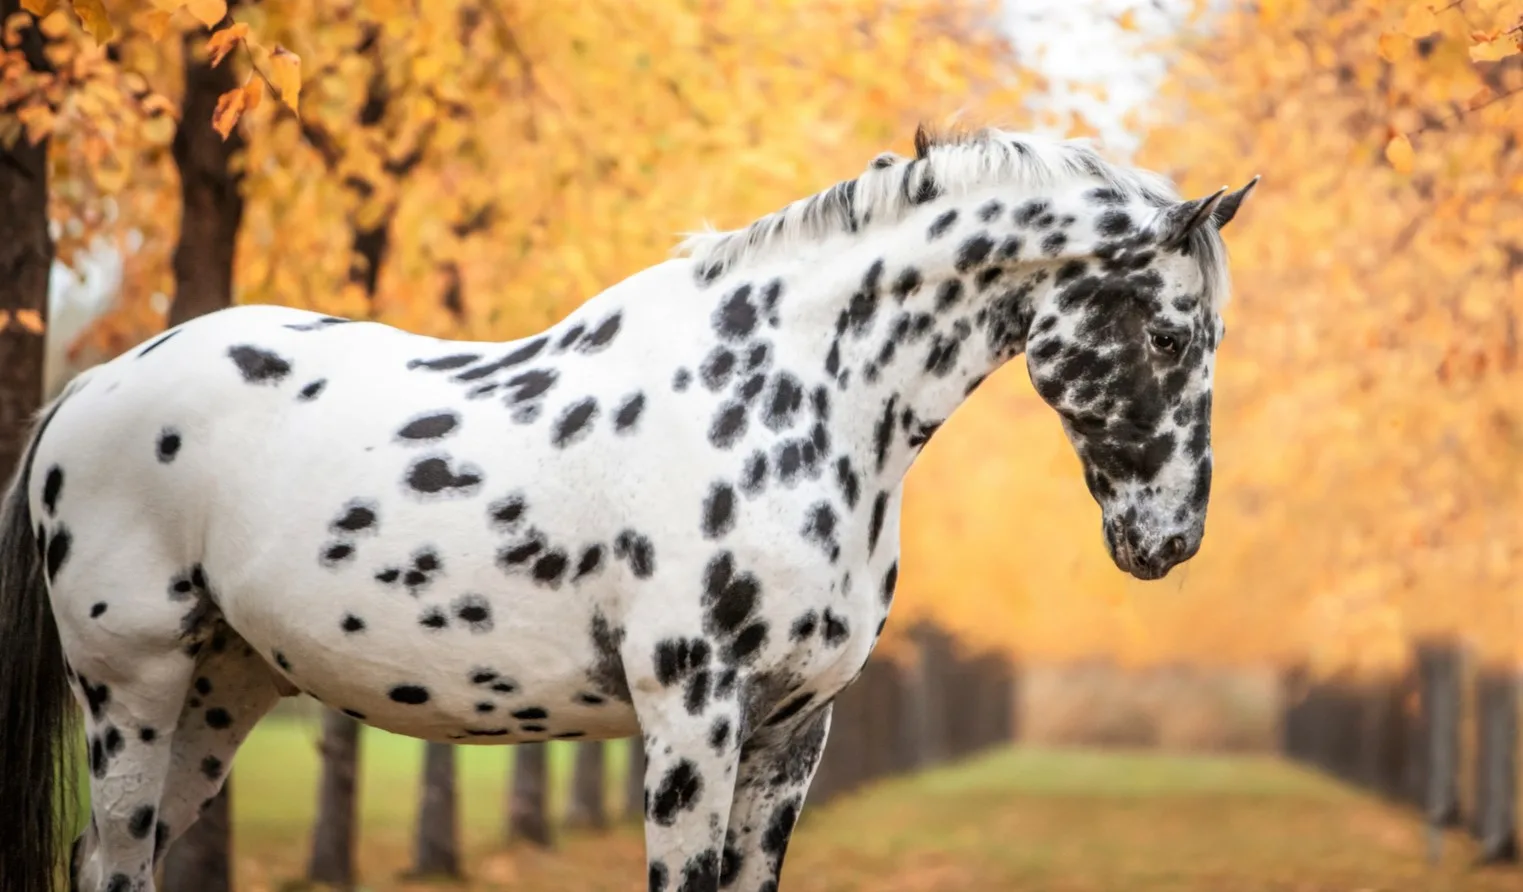 Black and white horse breed